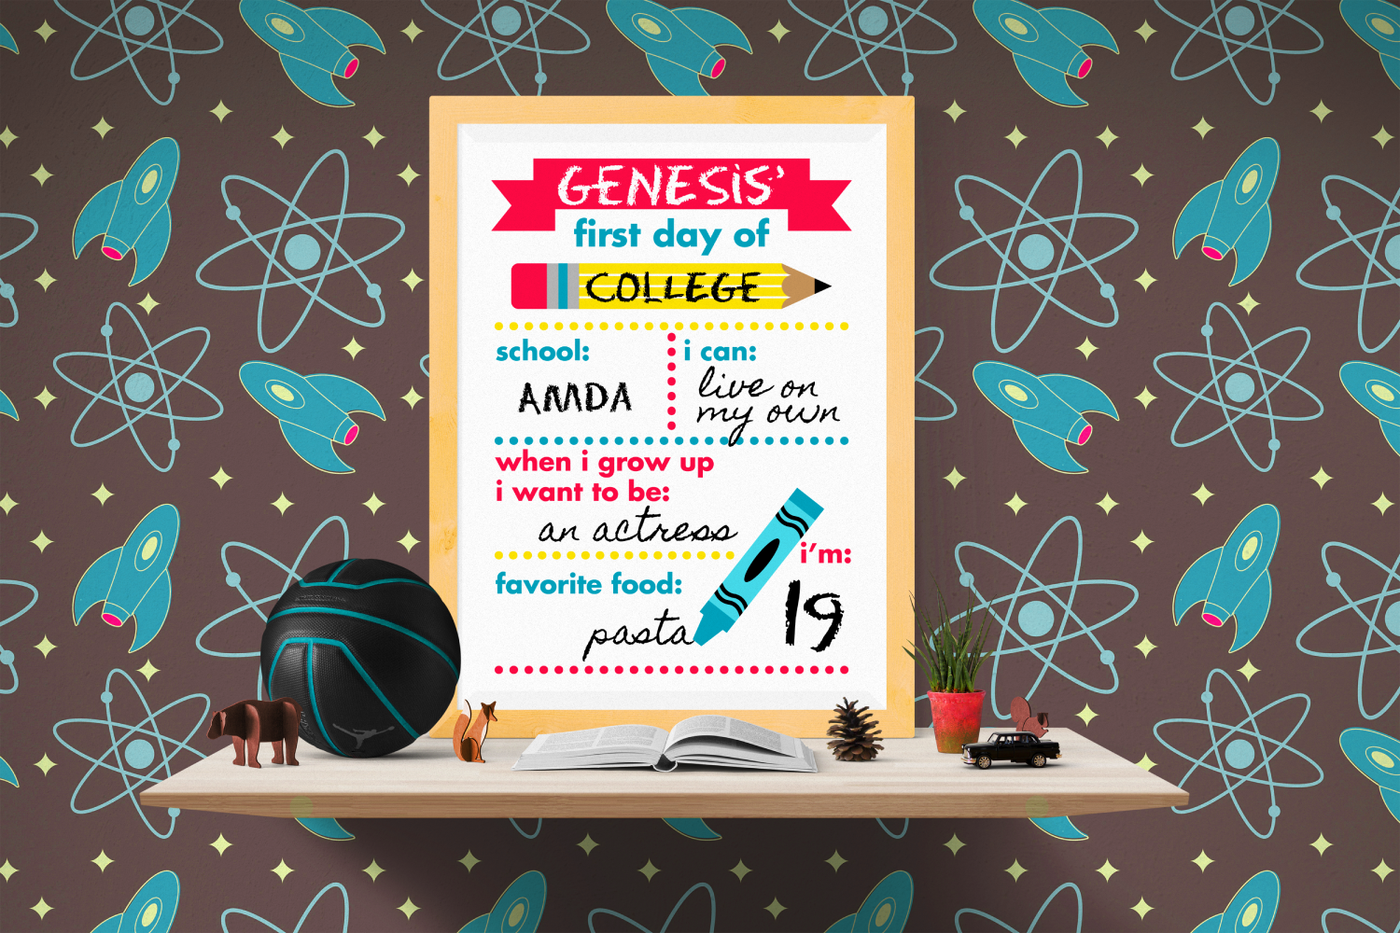 Framed poster on a desk. It has a pink banner, pencil, and crayon. There is space to ad the child's name and grade level, school, what they can do, what they want to be when they grow up, their age, and favorite food. The areas are separated by dotted lines.